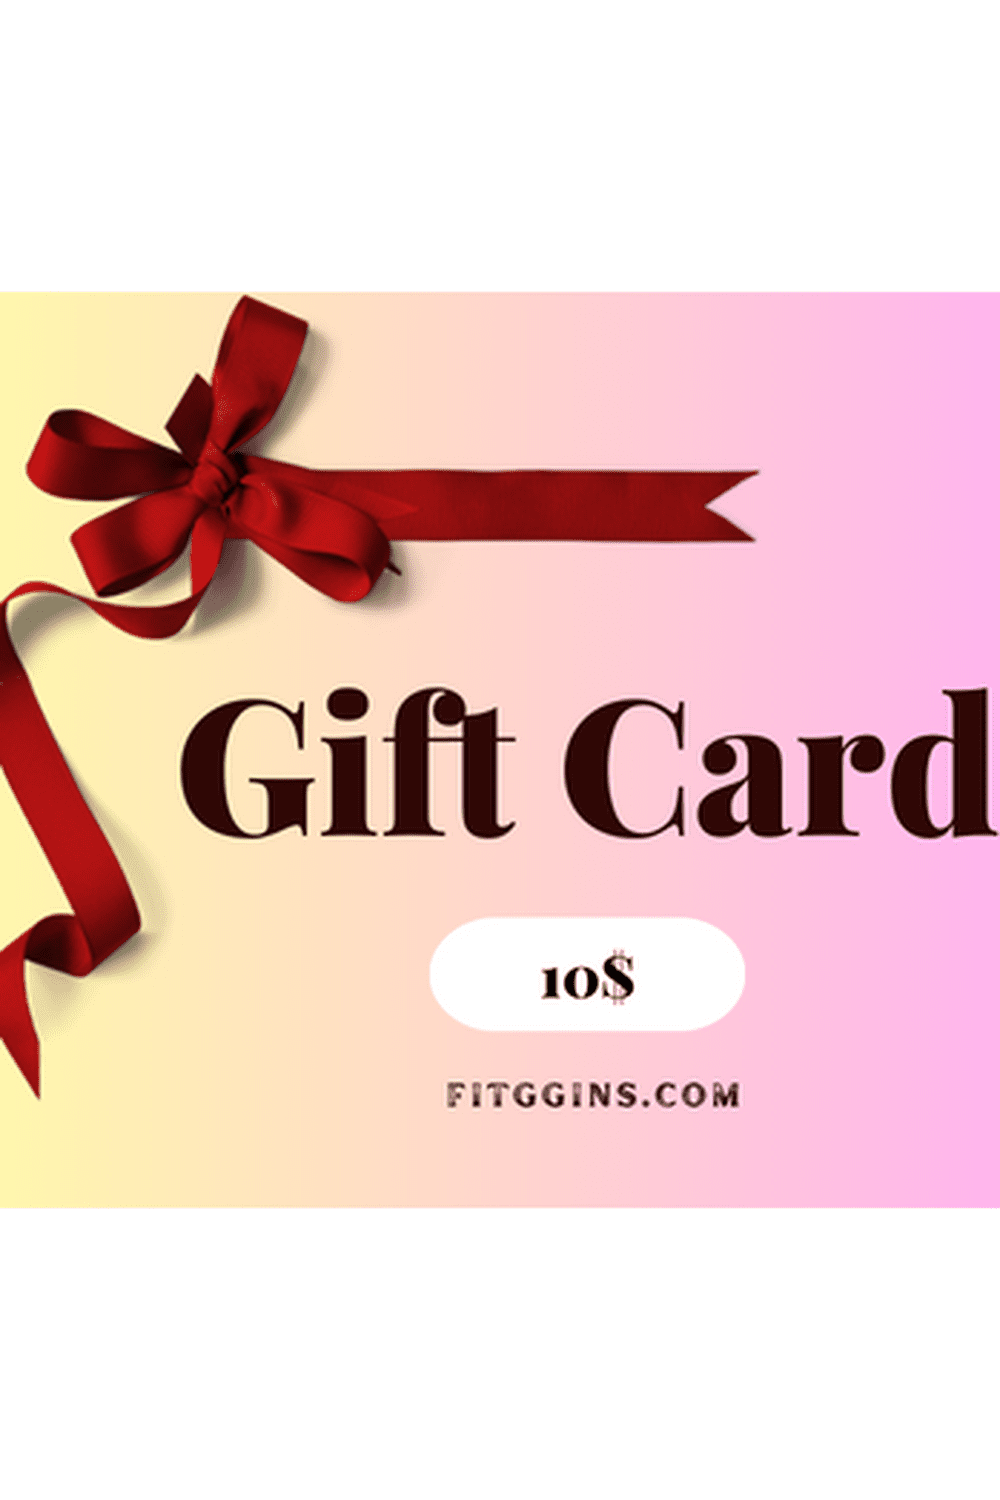 Gift Cards - - FITGGINS